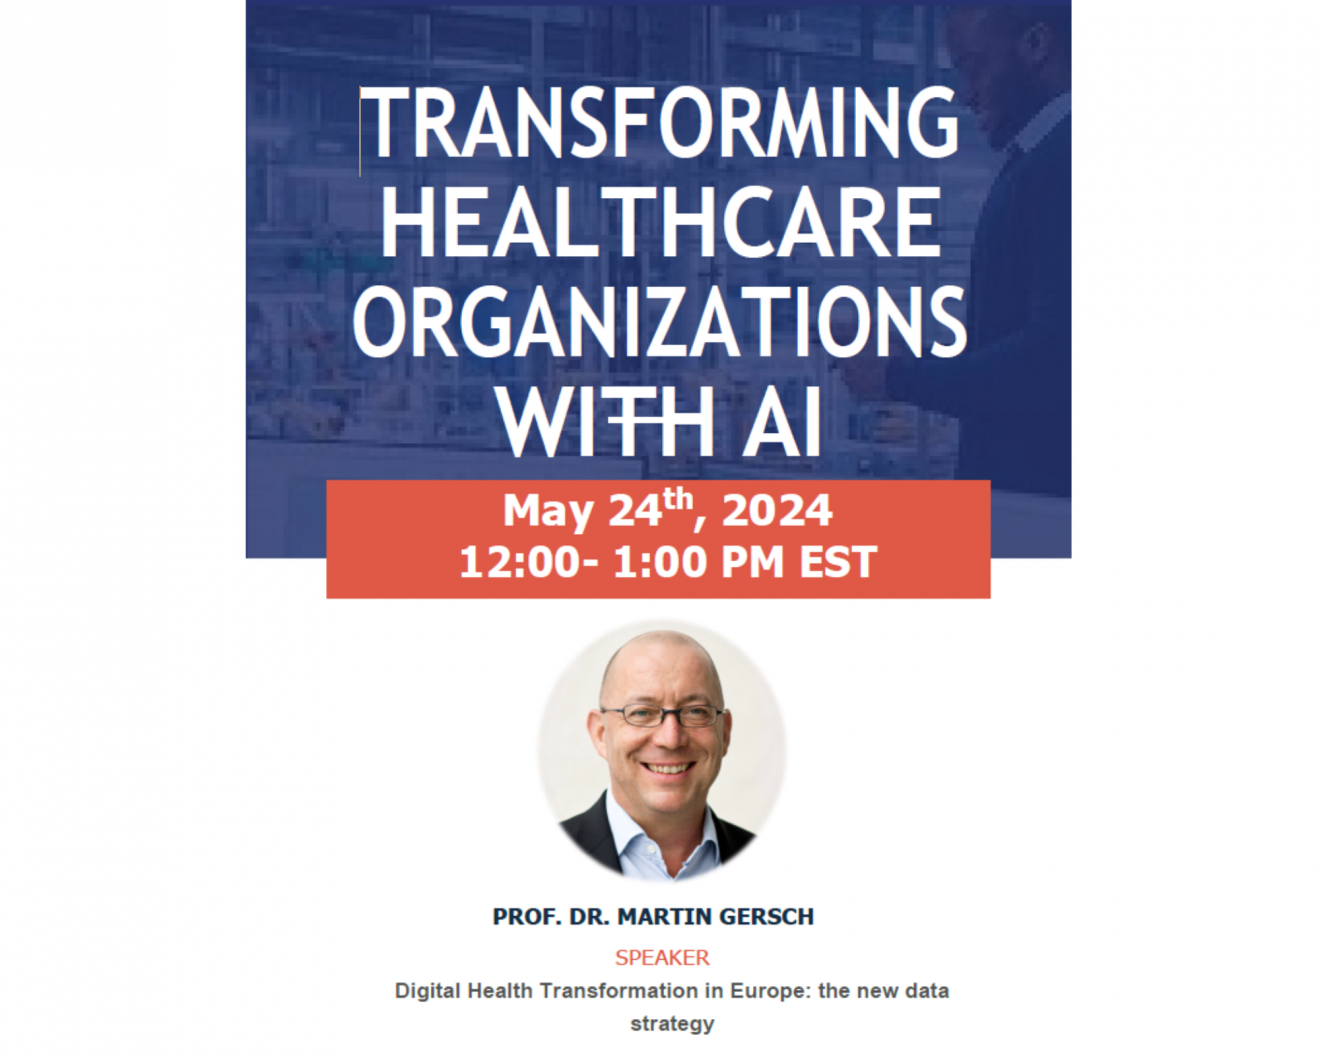 Text that says "Transforming Healthcare Organizations with AI May 24th, 2024 12:00 - 2:00 PM EST" a framed headshot of a person smiling. More text that says "Prof. Dr. Martin Gersch Speaker Digital Health Transformation in Europe: the new Data Strategy"